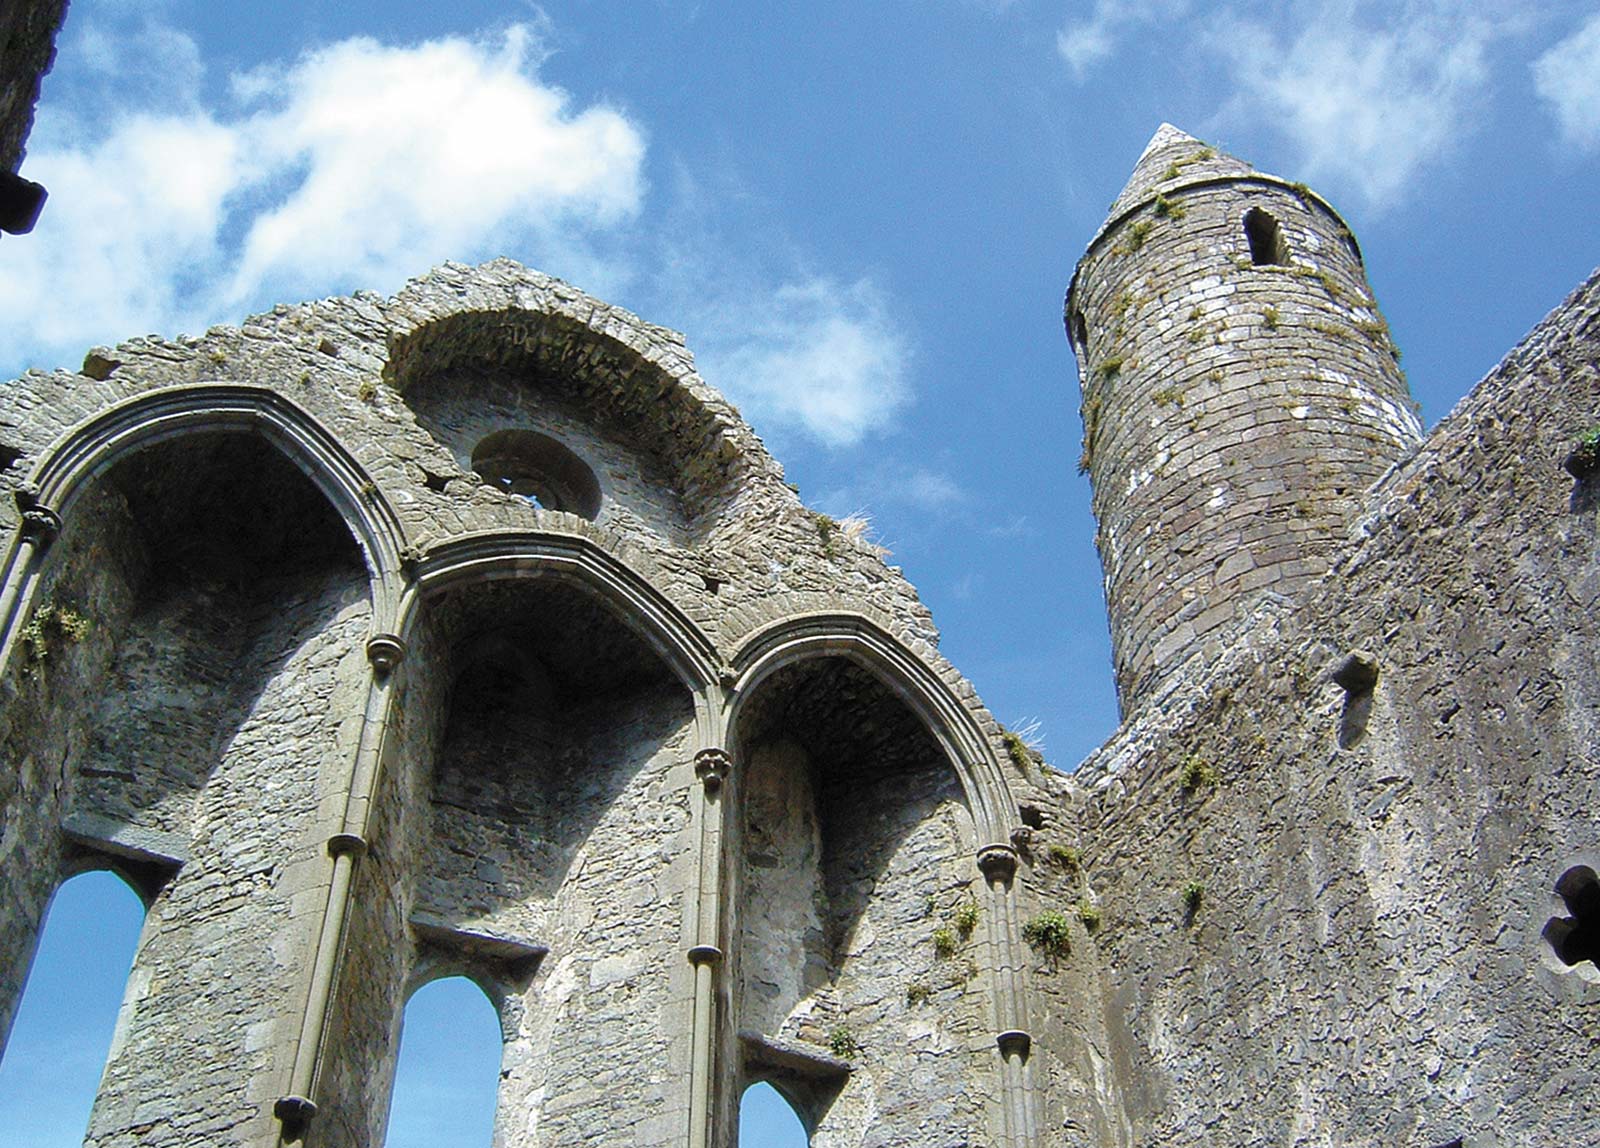 The ruins of the Rock of Cashel are the most evocative sight in Irelands - photo 16